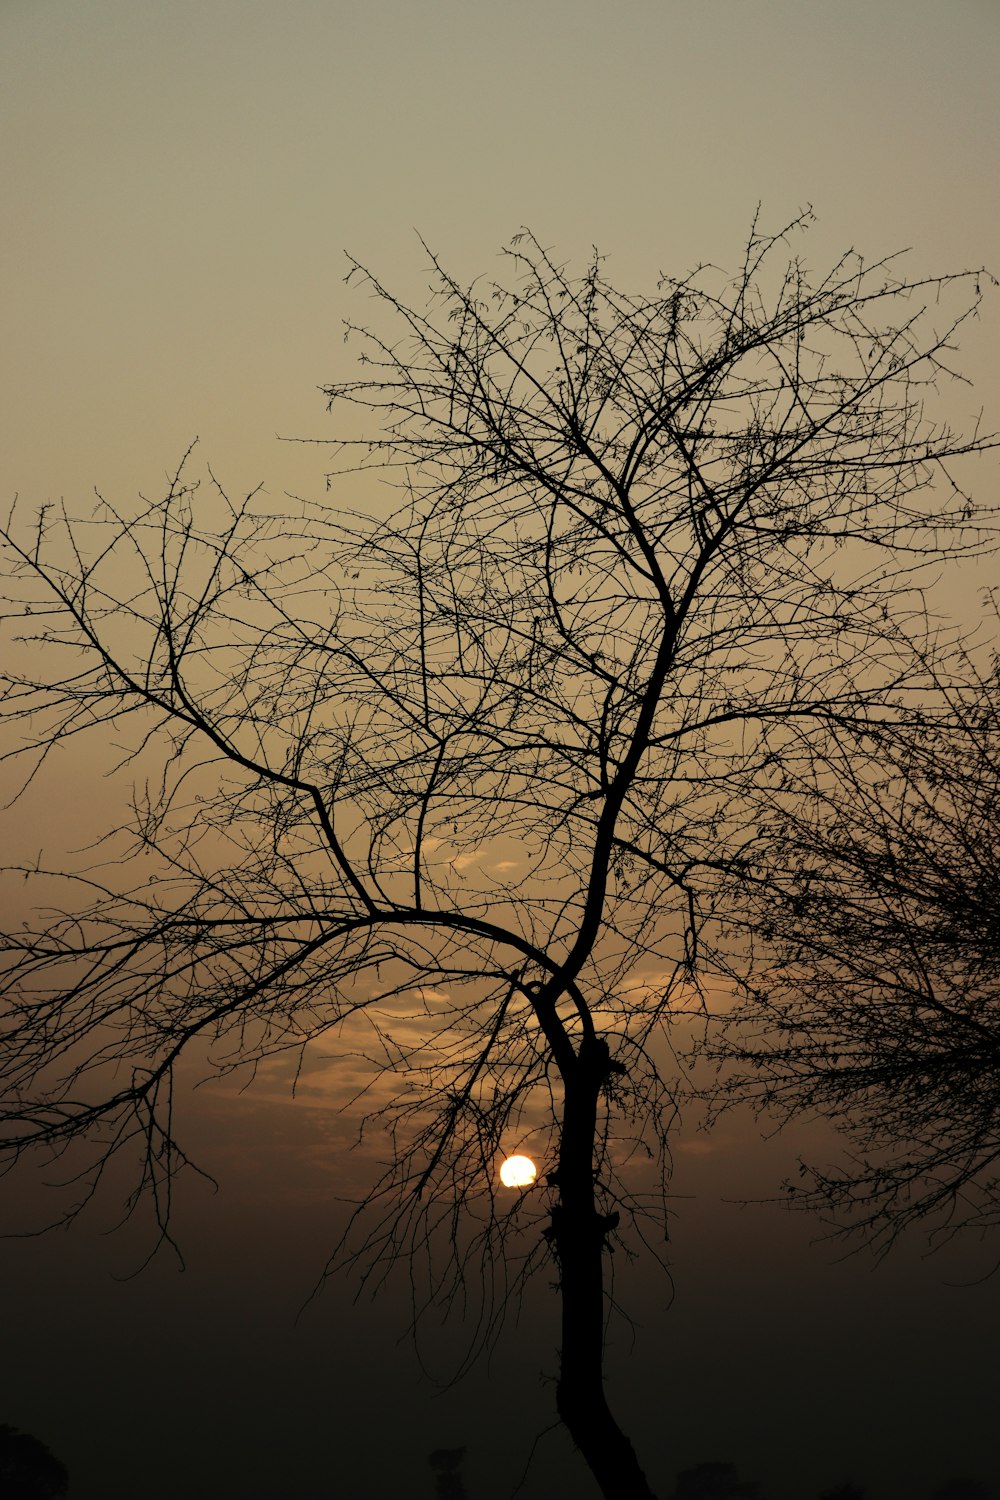 the sun is setting behind a bare tree